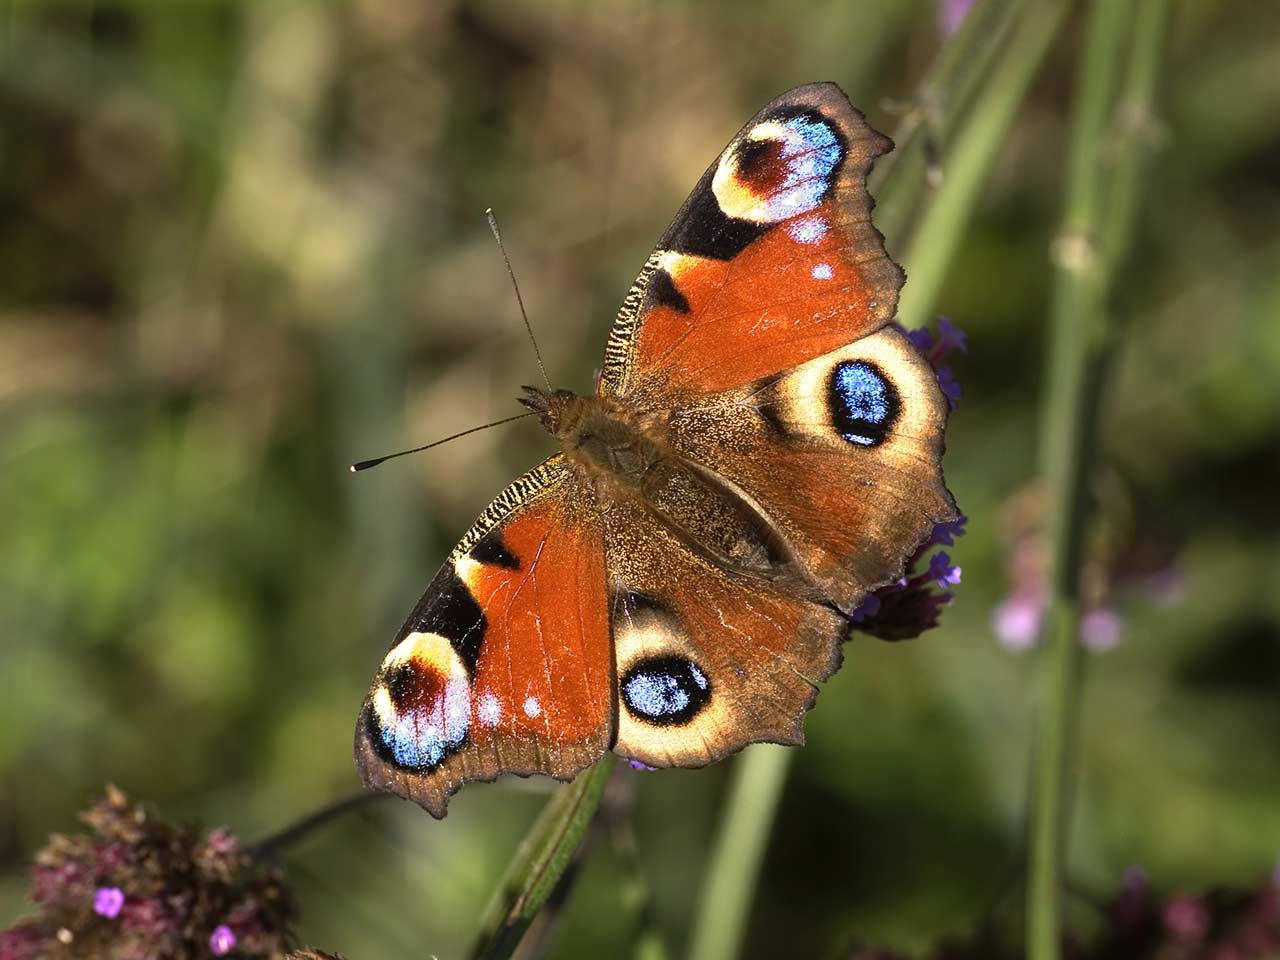 Peacock butterfly photographed by David Chapman